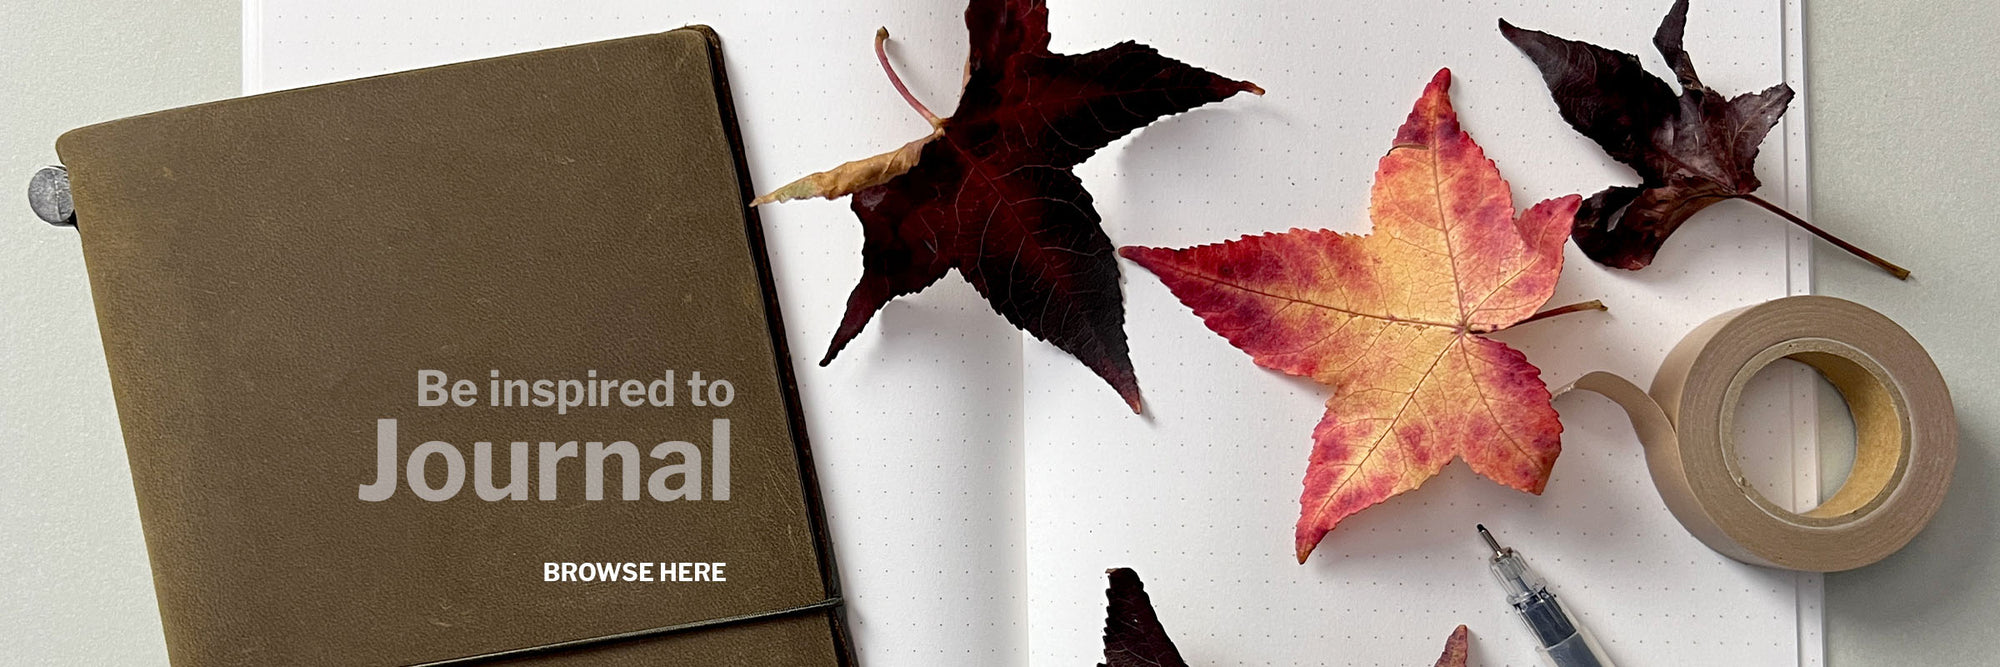 Be inspired to journal leather journal cover on top of open dot journal pages with a pen and bright autumn leaves scattered